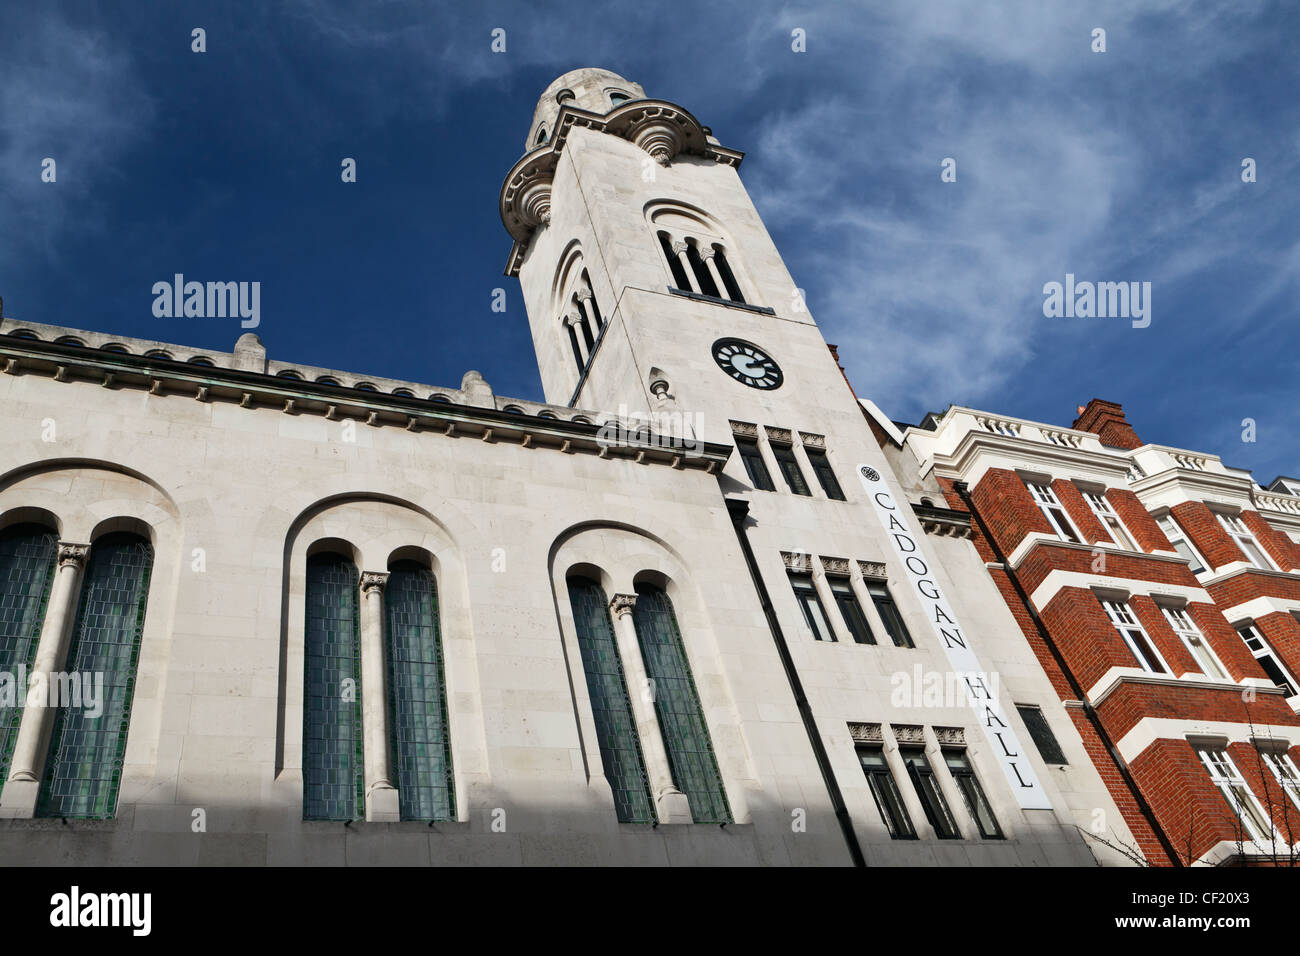 The exterior of the Grade ll listed Cadogan Hall, originally built as the First Church of Christ, Scientist in 1907. The buildin Stock Photo